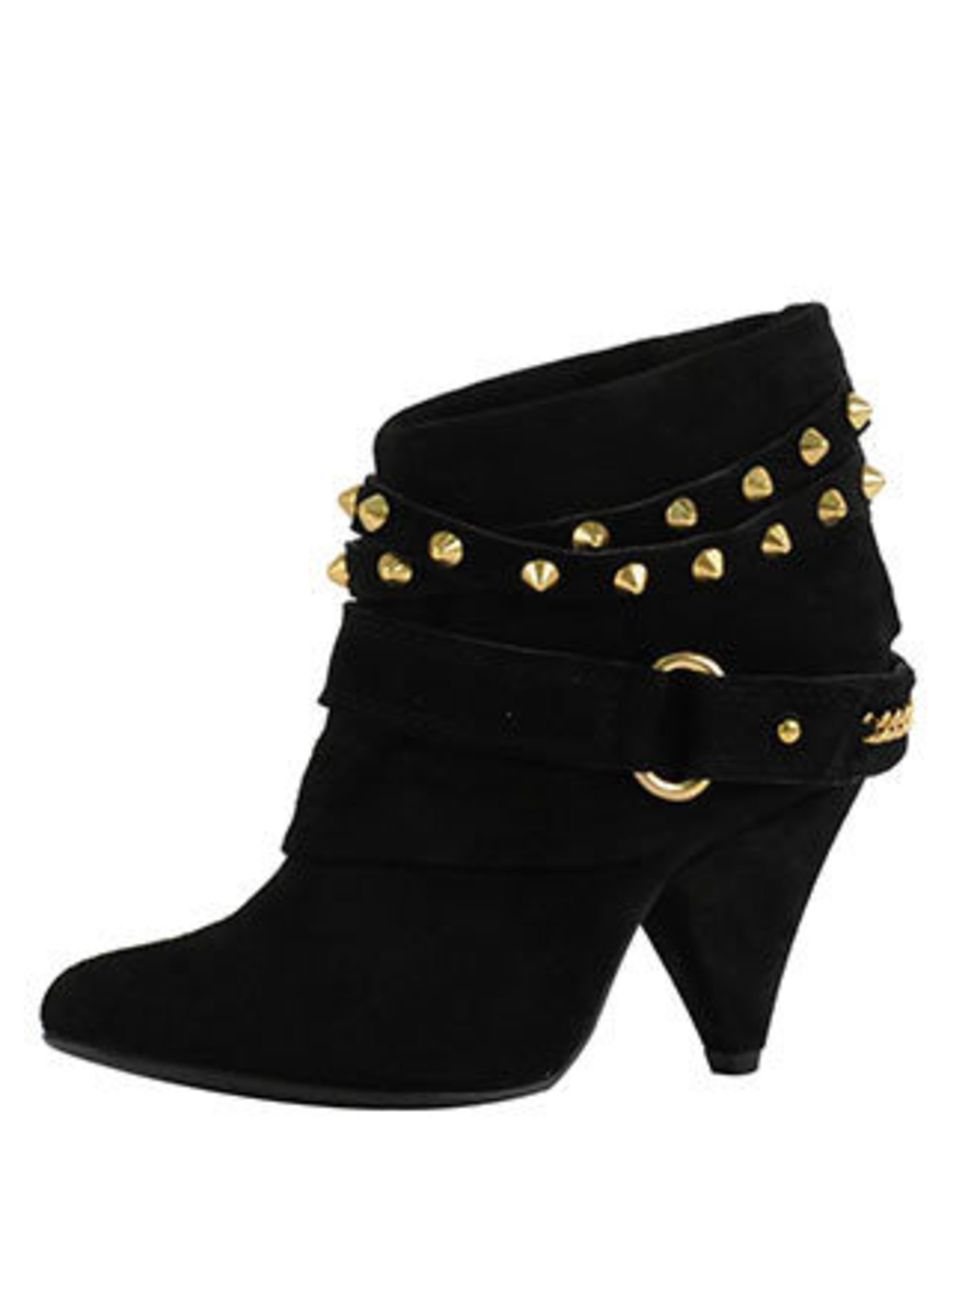 <p>Cowgirl meets rock chick, the ELLE team love these boots. They will add edge to everything and arent too high that youll go skidding if it snows again. (Please, let it snow!)</p><p>Boots, £69.99 by <a href="http://xml.riverisland.com/flash/content.ph